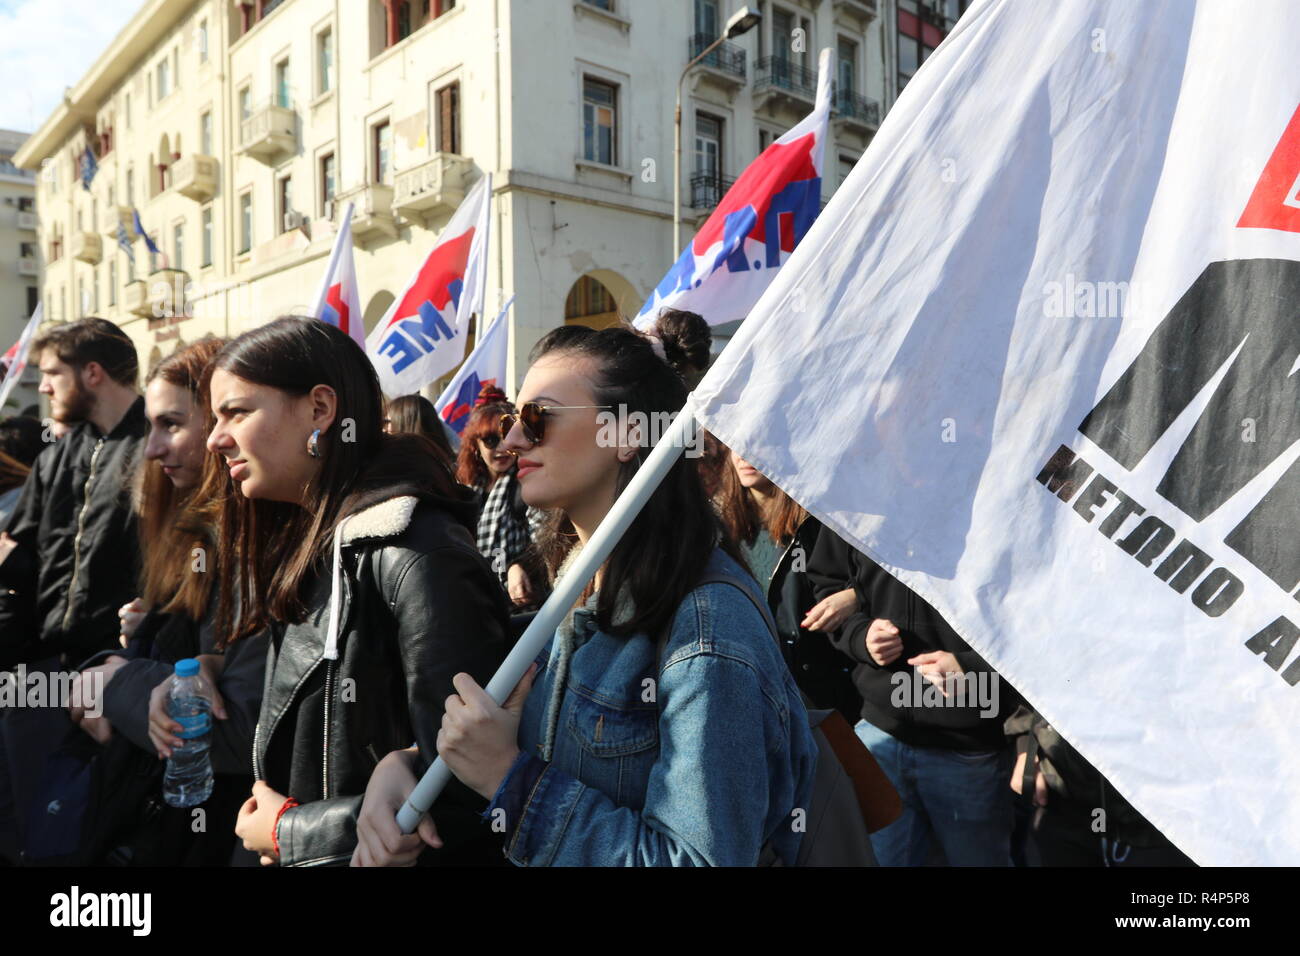 Thessaloniki, Greece, 28th November, 2018.  Students attend a rally during a 24-hour walkout staged by Greece's largest private sector union GSEE  against planned pension cuts and to demand the reversal of labour reforms implemented under the country's third bailout. The strike by the GSEE union is the second major strike since Greece exited its bailout programm in August. Credit : Orhan Tsolak / Alamy Live News. Stock Photo